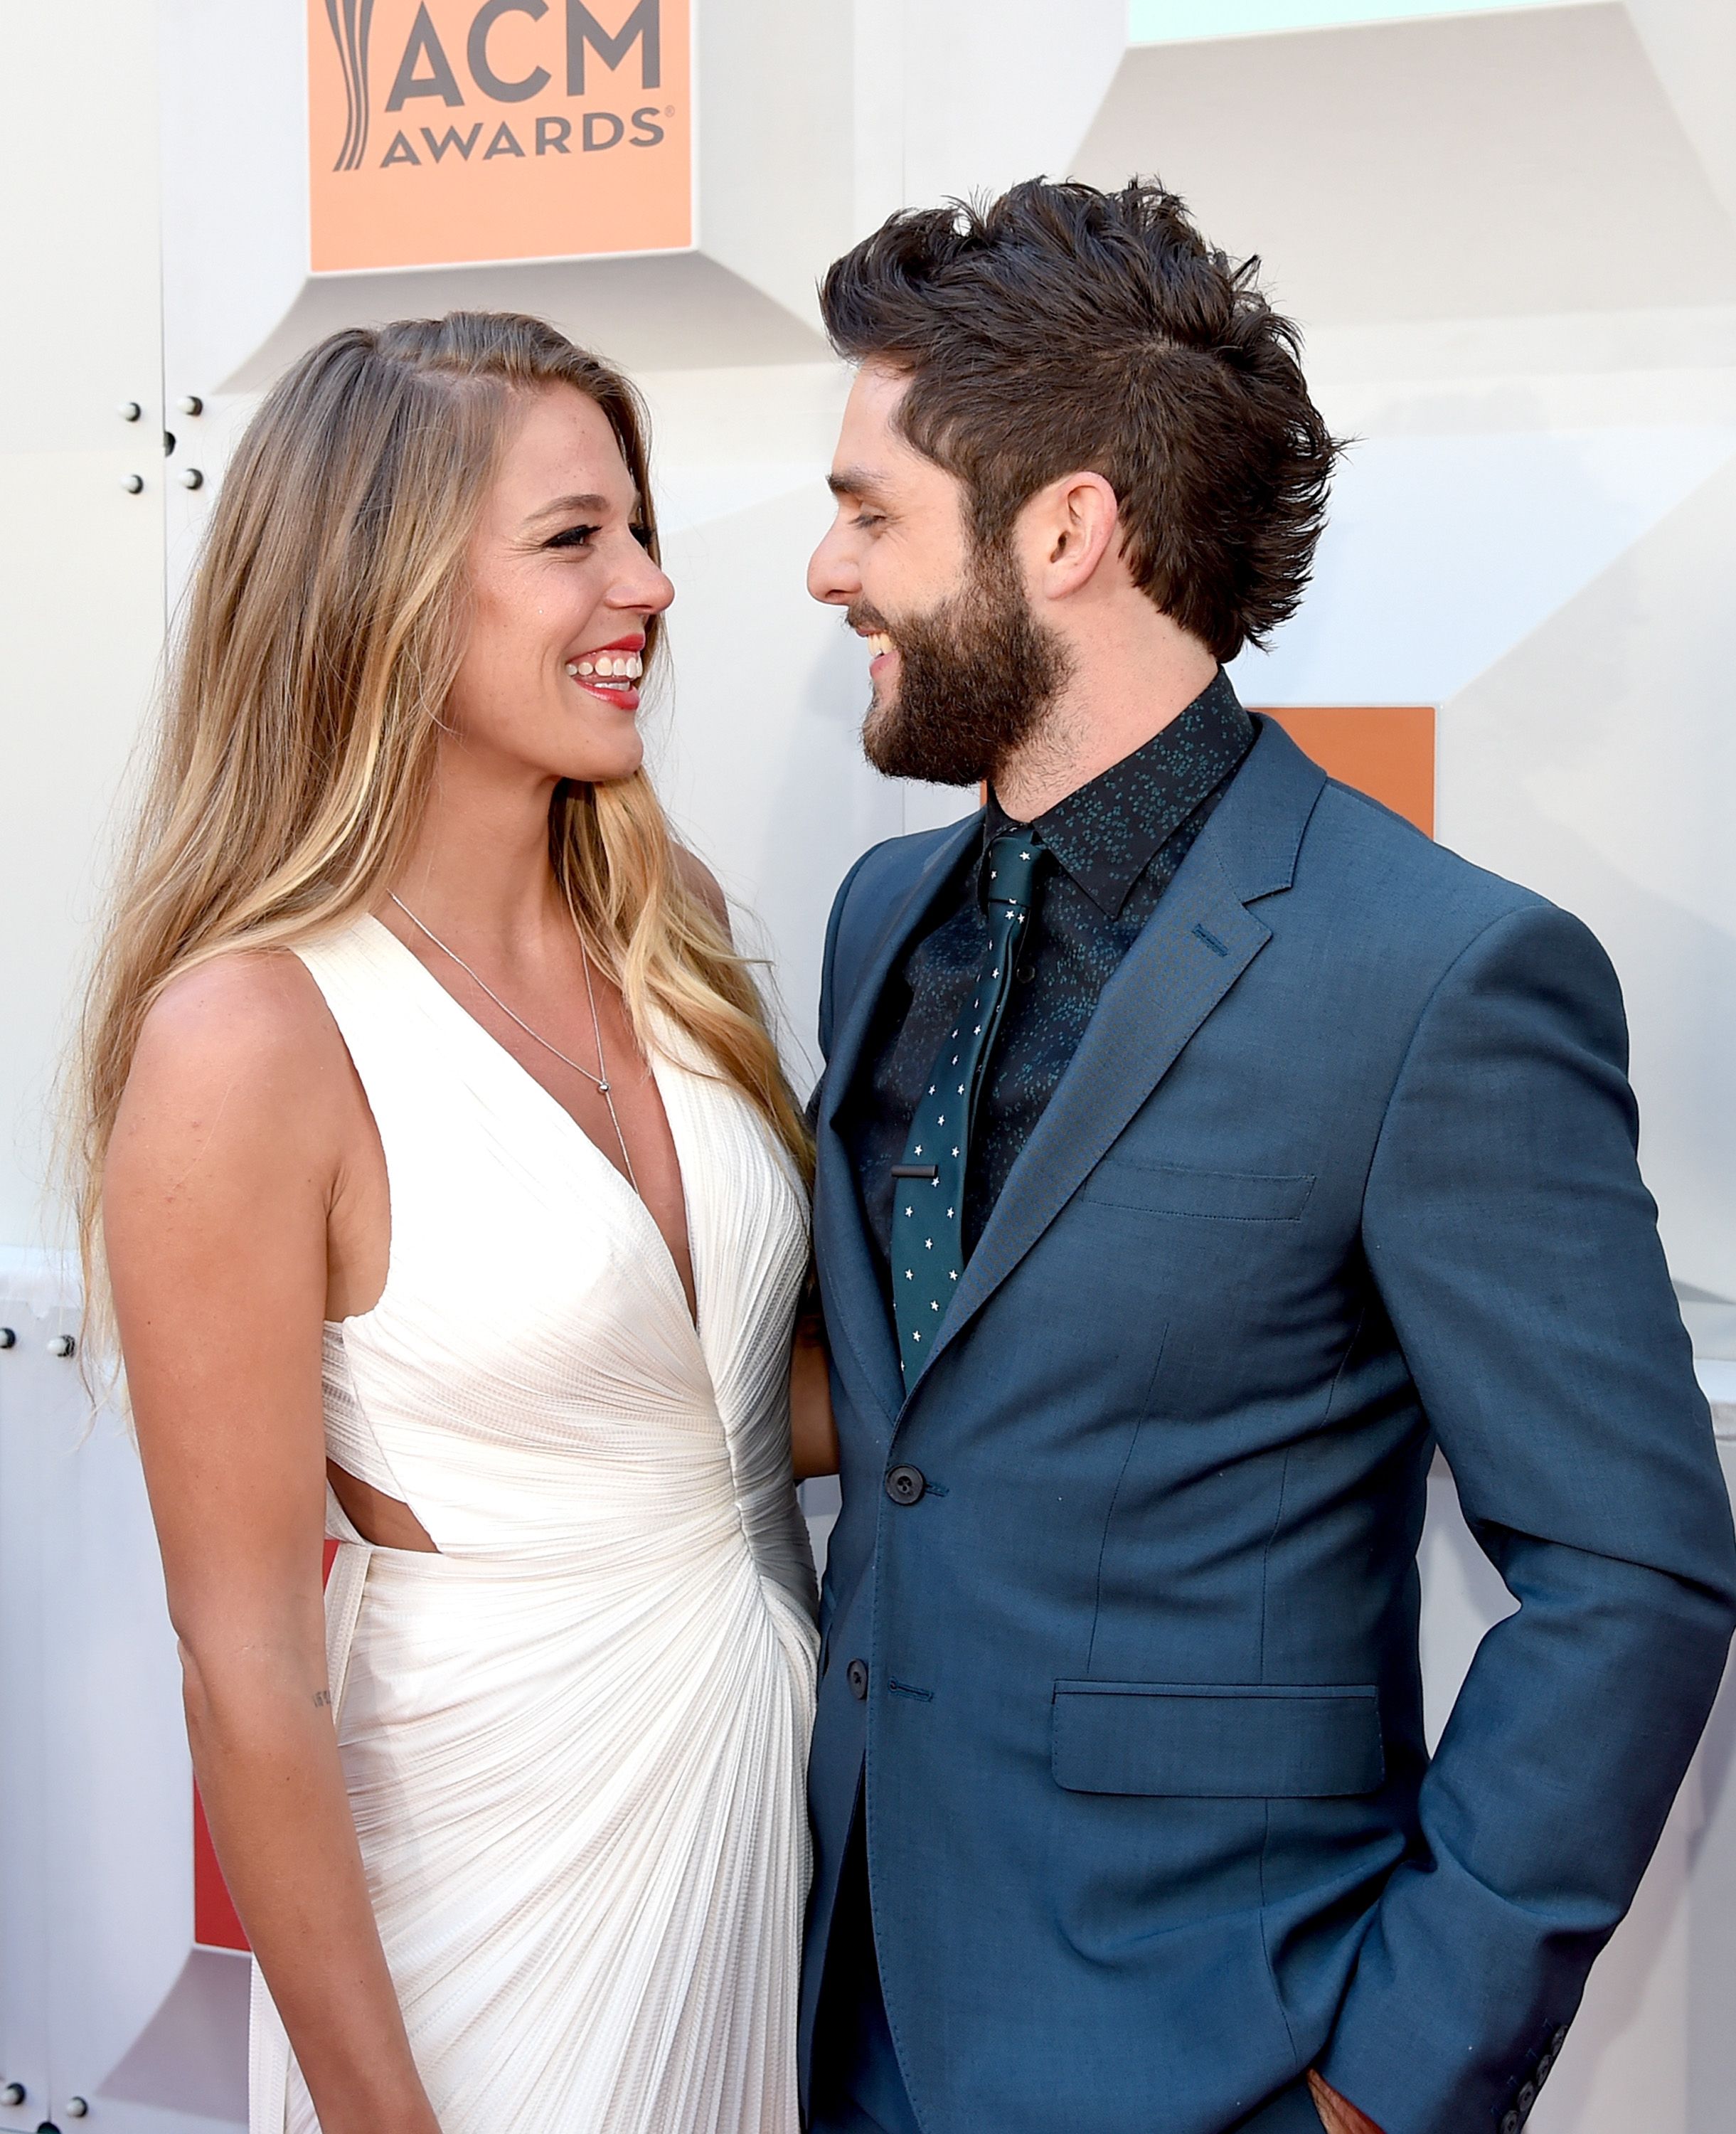 All About Thomas Rhett and Wife Lauren Akinss Marriage and Kids